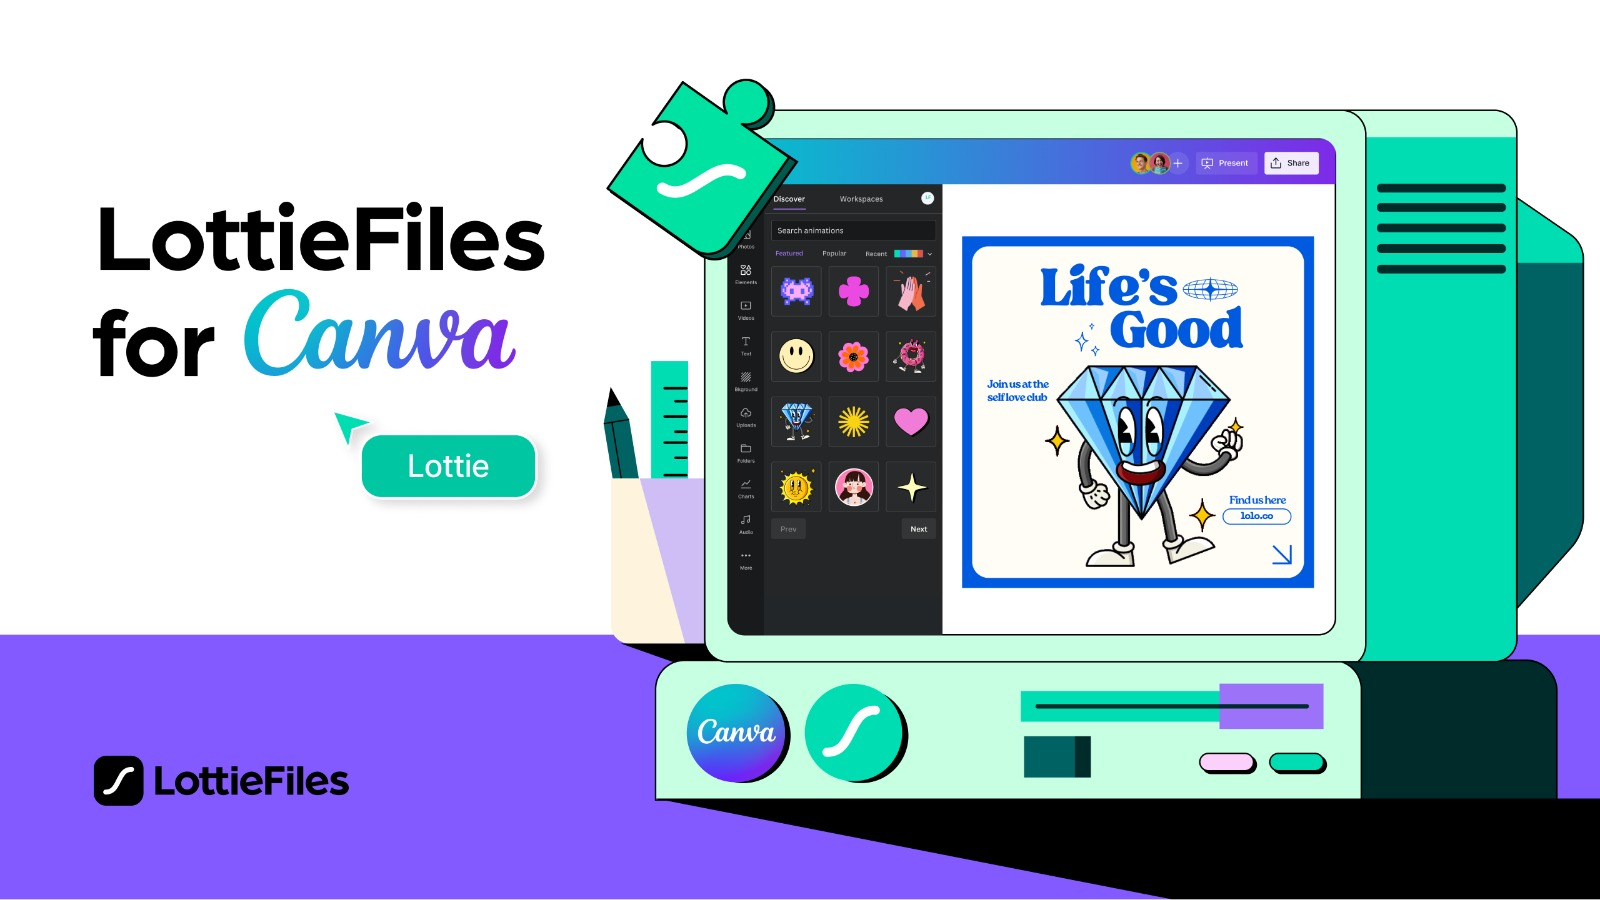 Bring the Power of Motion with LottieFiles for Canva App